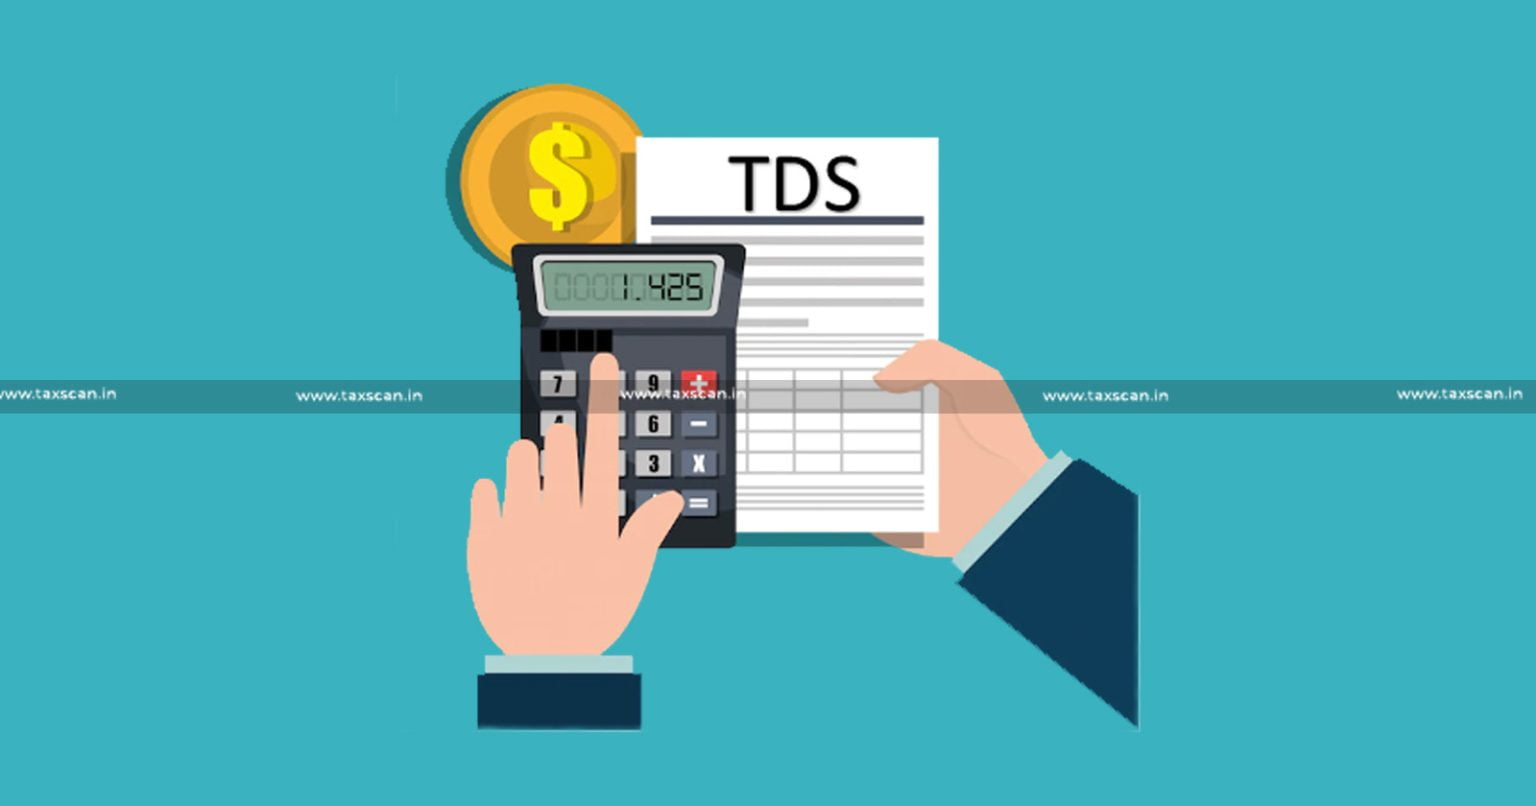 calculation of TDS - TDS - Calculation - Employee - Salary - Income - Employee Salary - TDS on Employee - taxscan